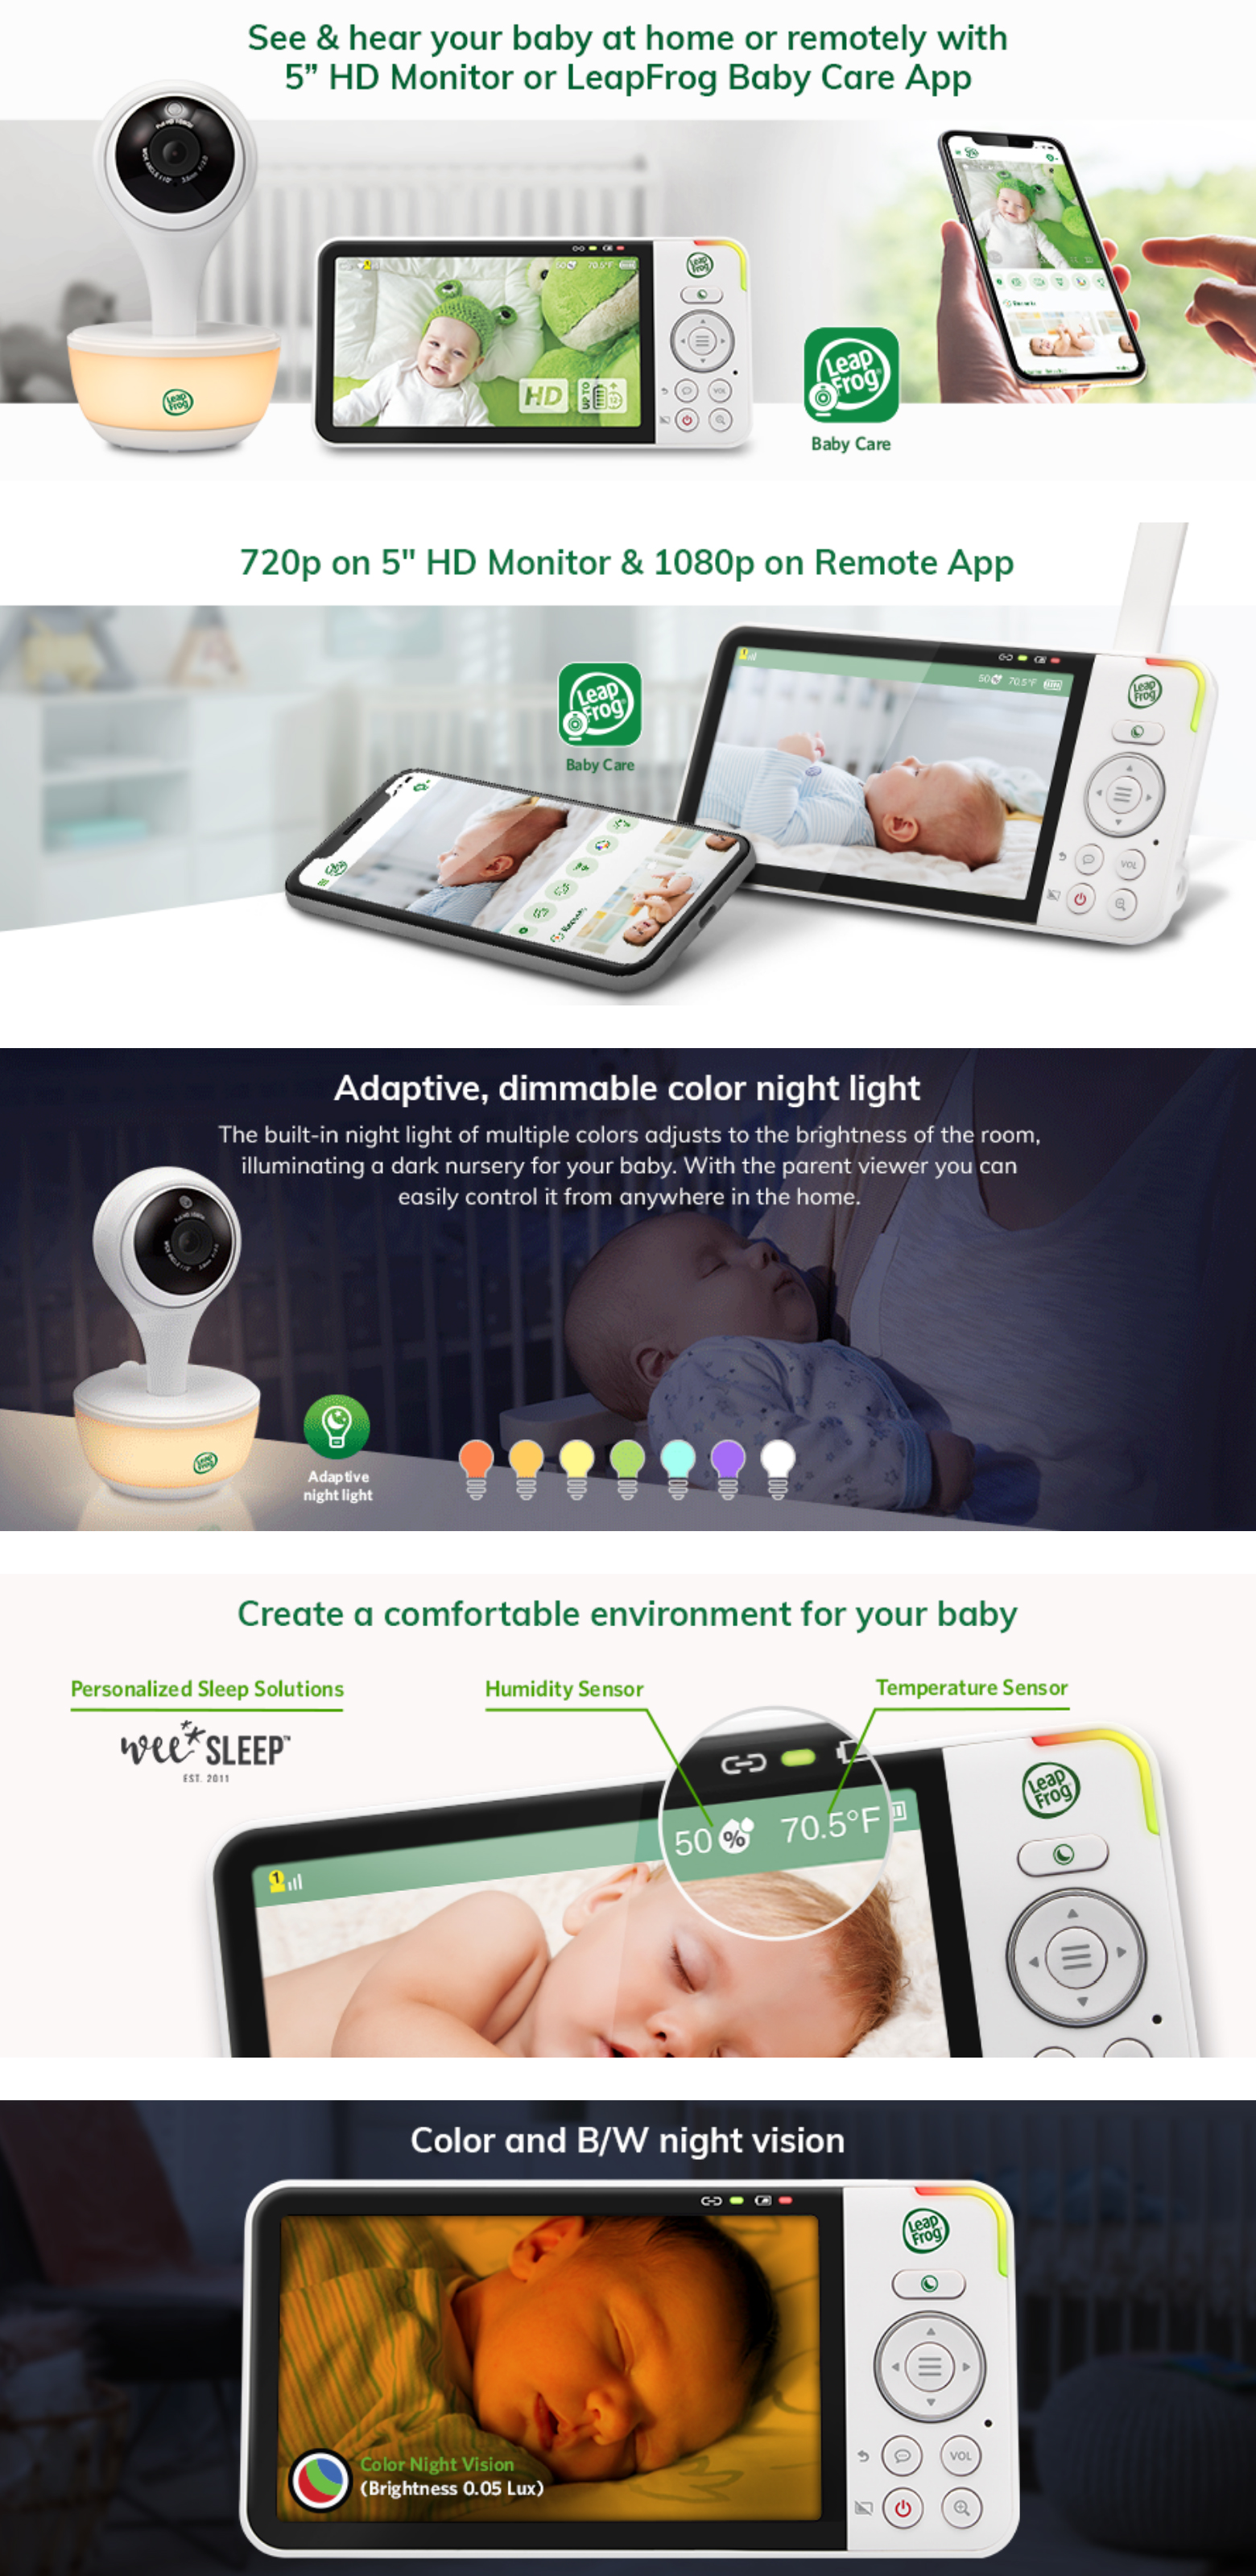 Baby-Monitors-LeapFrog-LF815HD-HD-Video-with-Remote-Access-Baby-Monitor-1